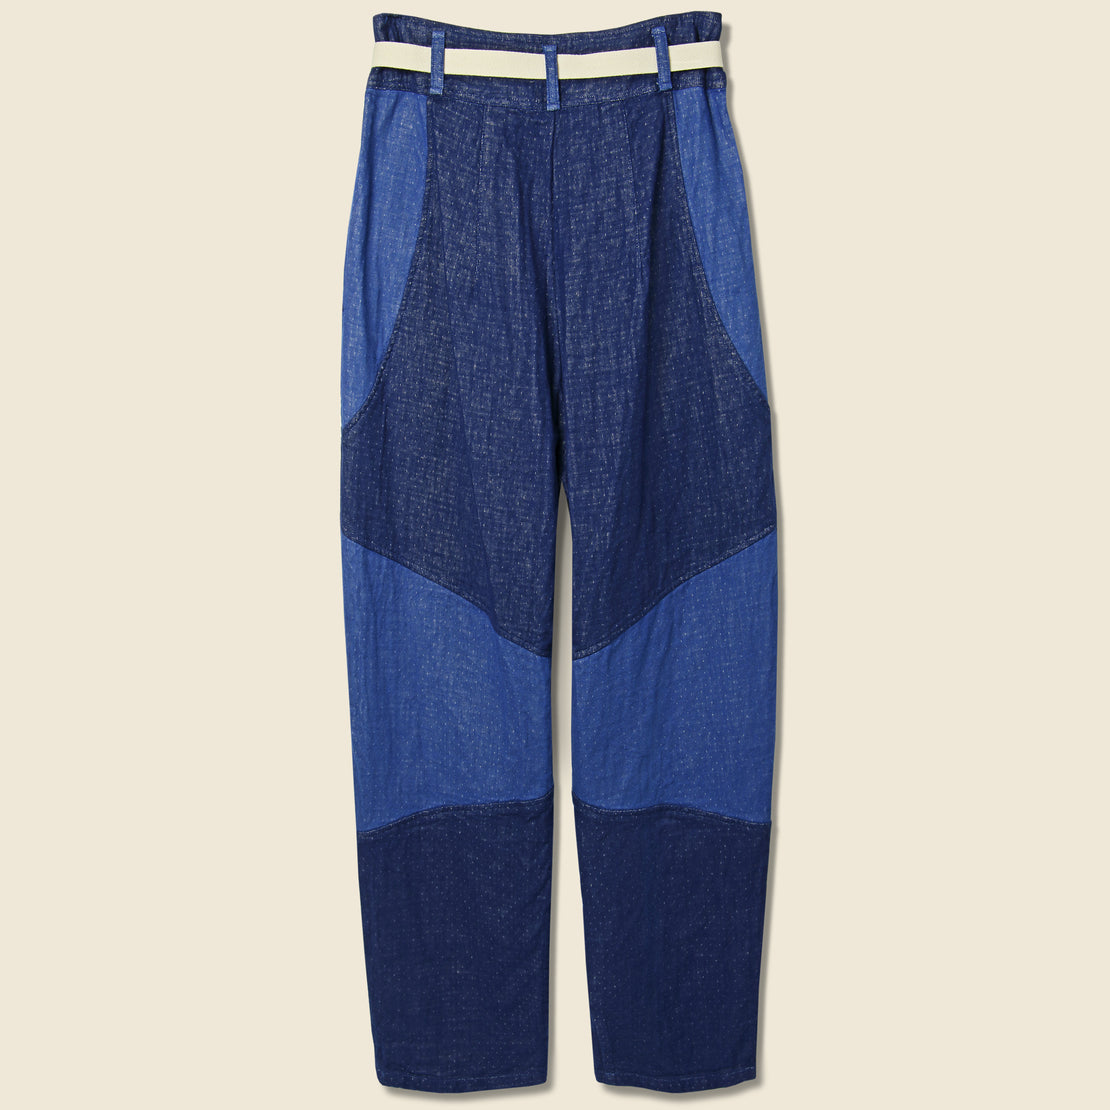 Giselle Pant - Indigo Patchwork - Atelier Delphine - STAG Provisions - W - Pants - Twill